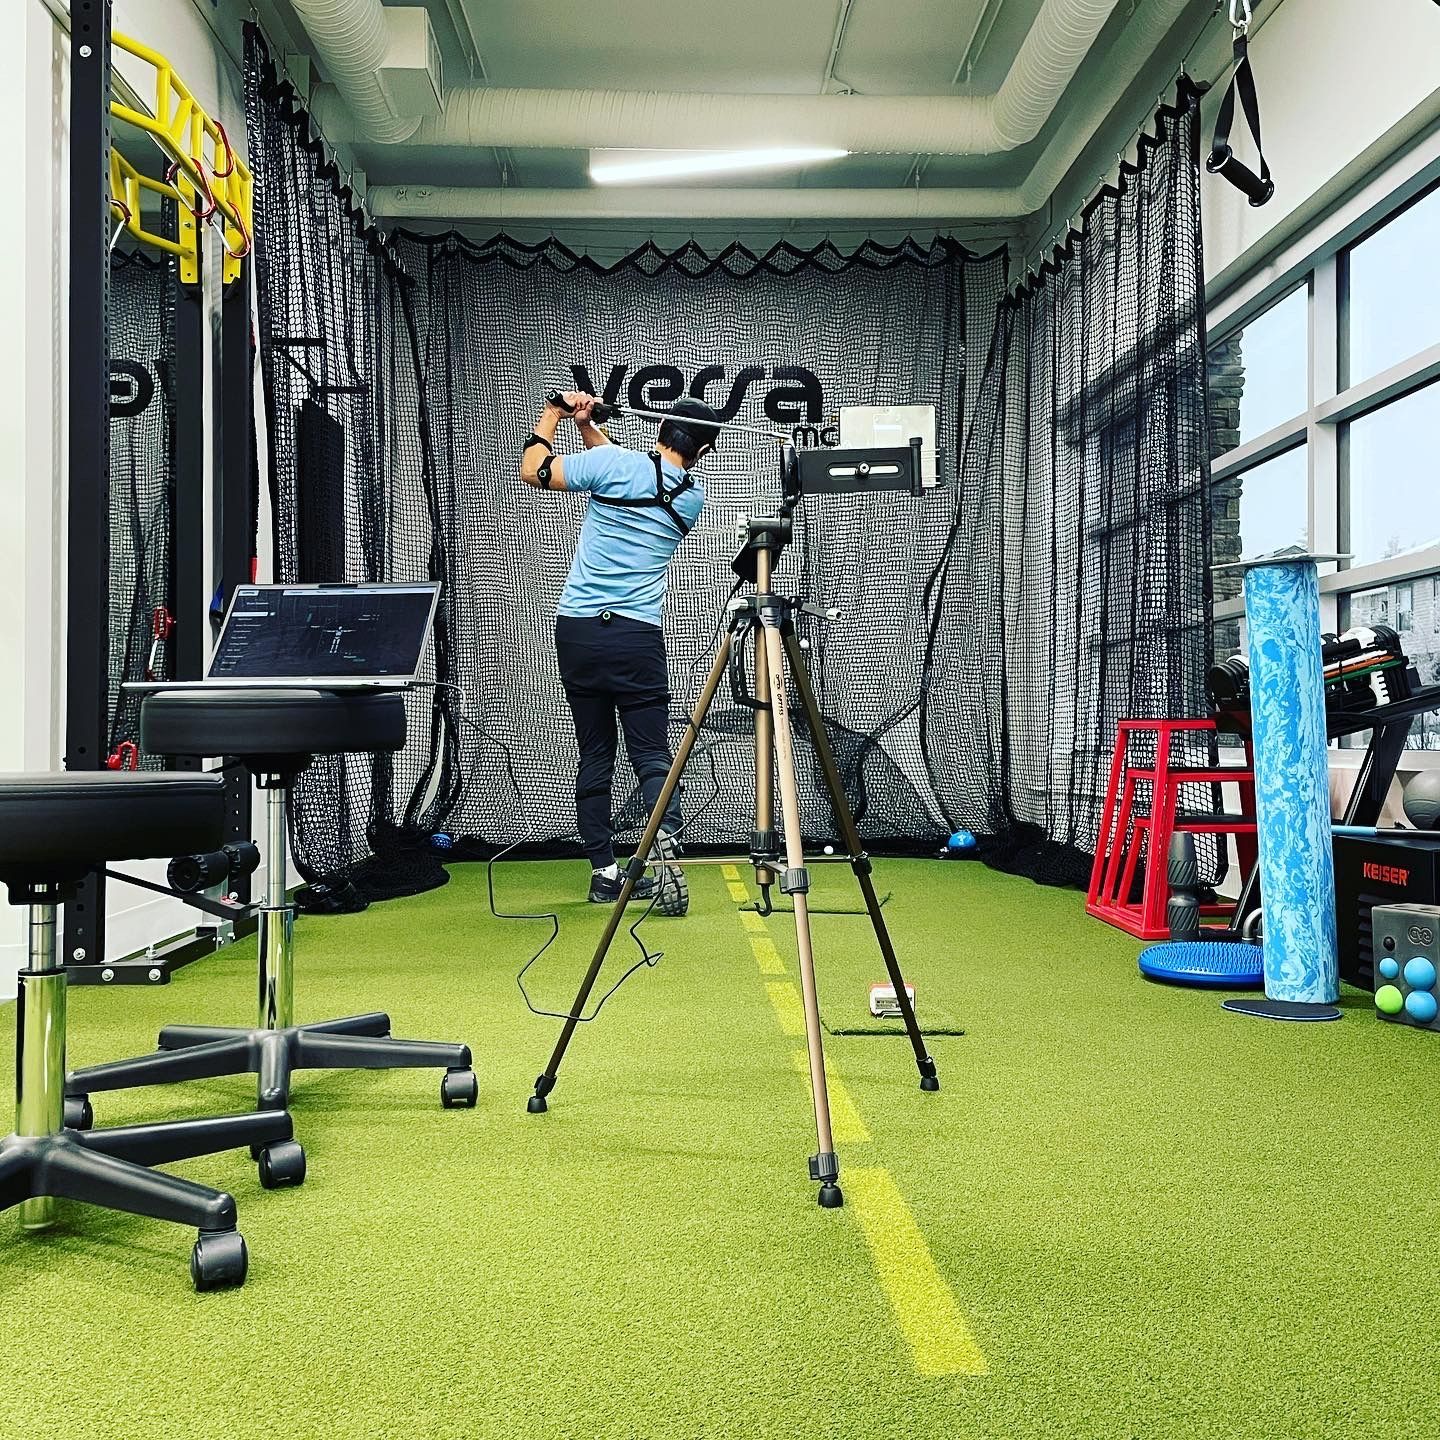 a man is standing in a gym with a camera on a tripod .